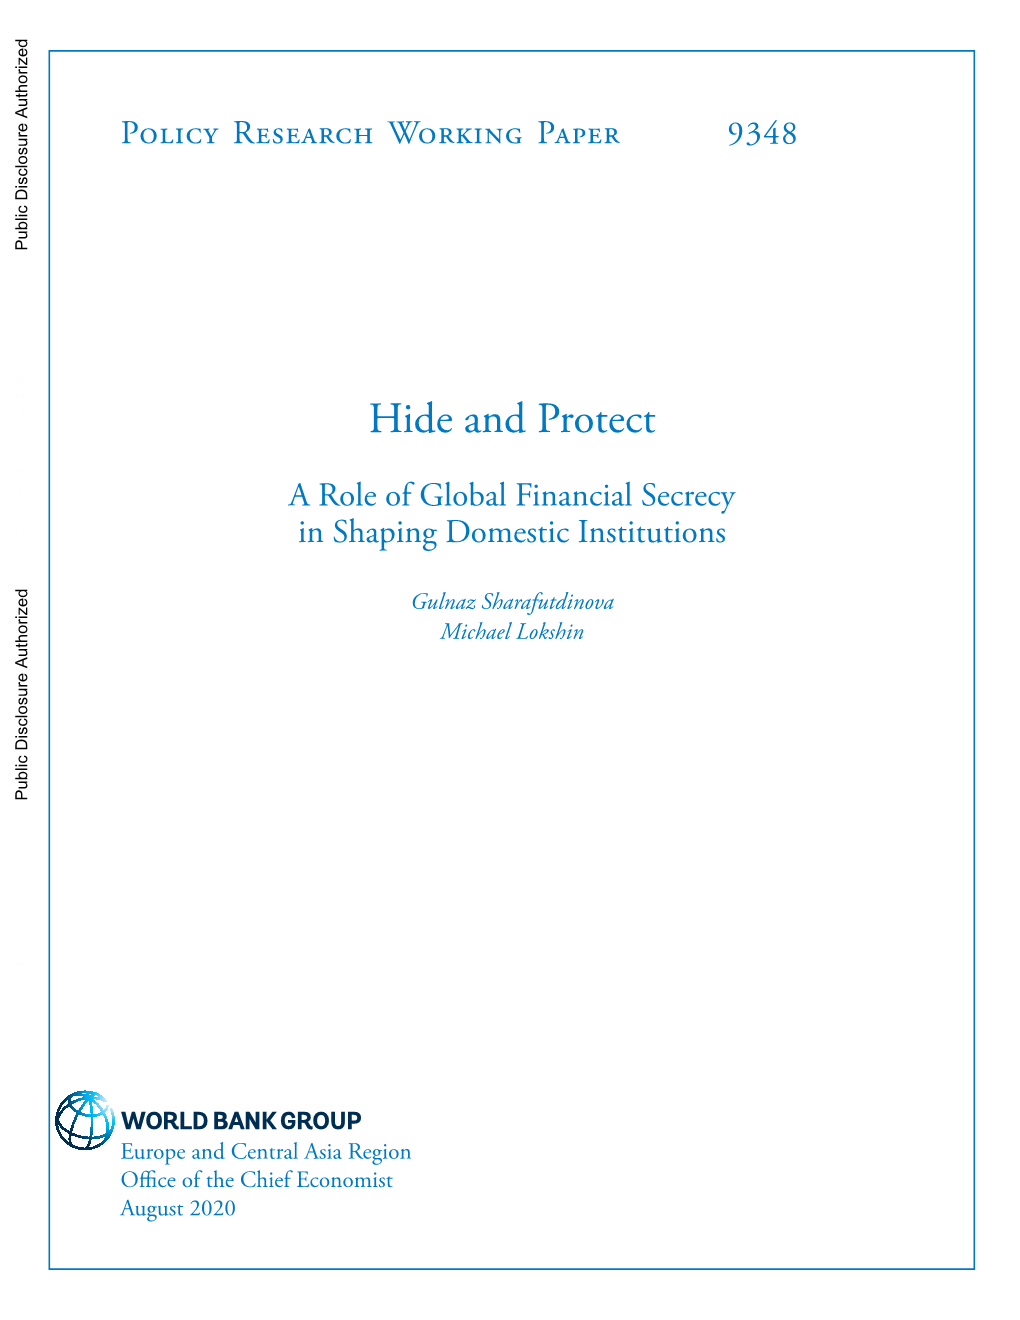 Hide-And-Protect-A-Role-Of-Global-Financial-Secrecy-In-Shaping-Domestic-Institutions.Pdf